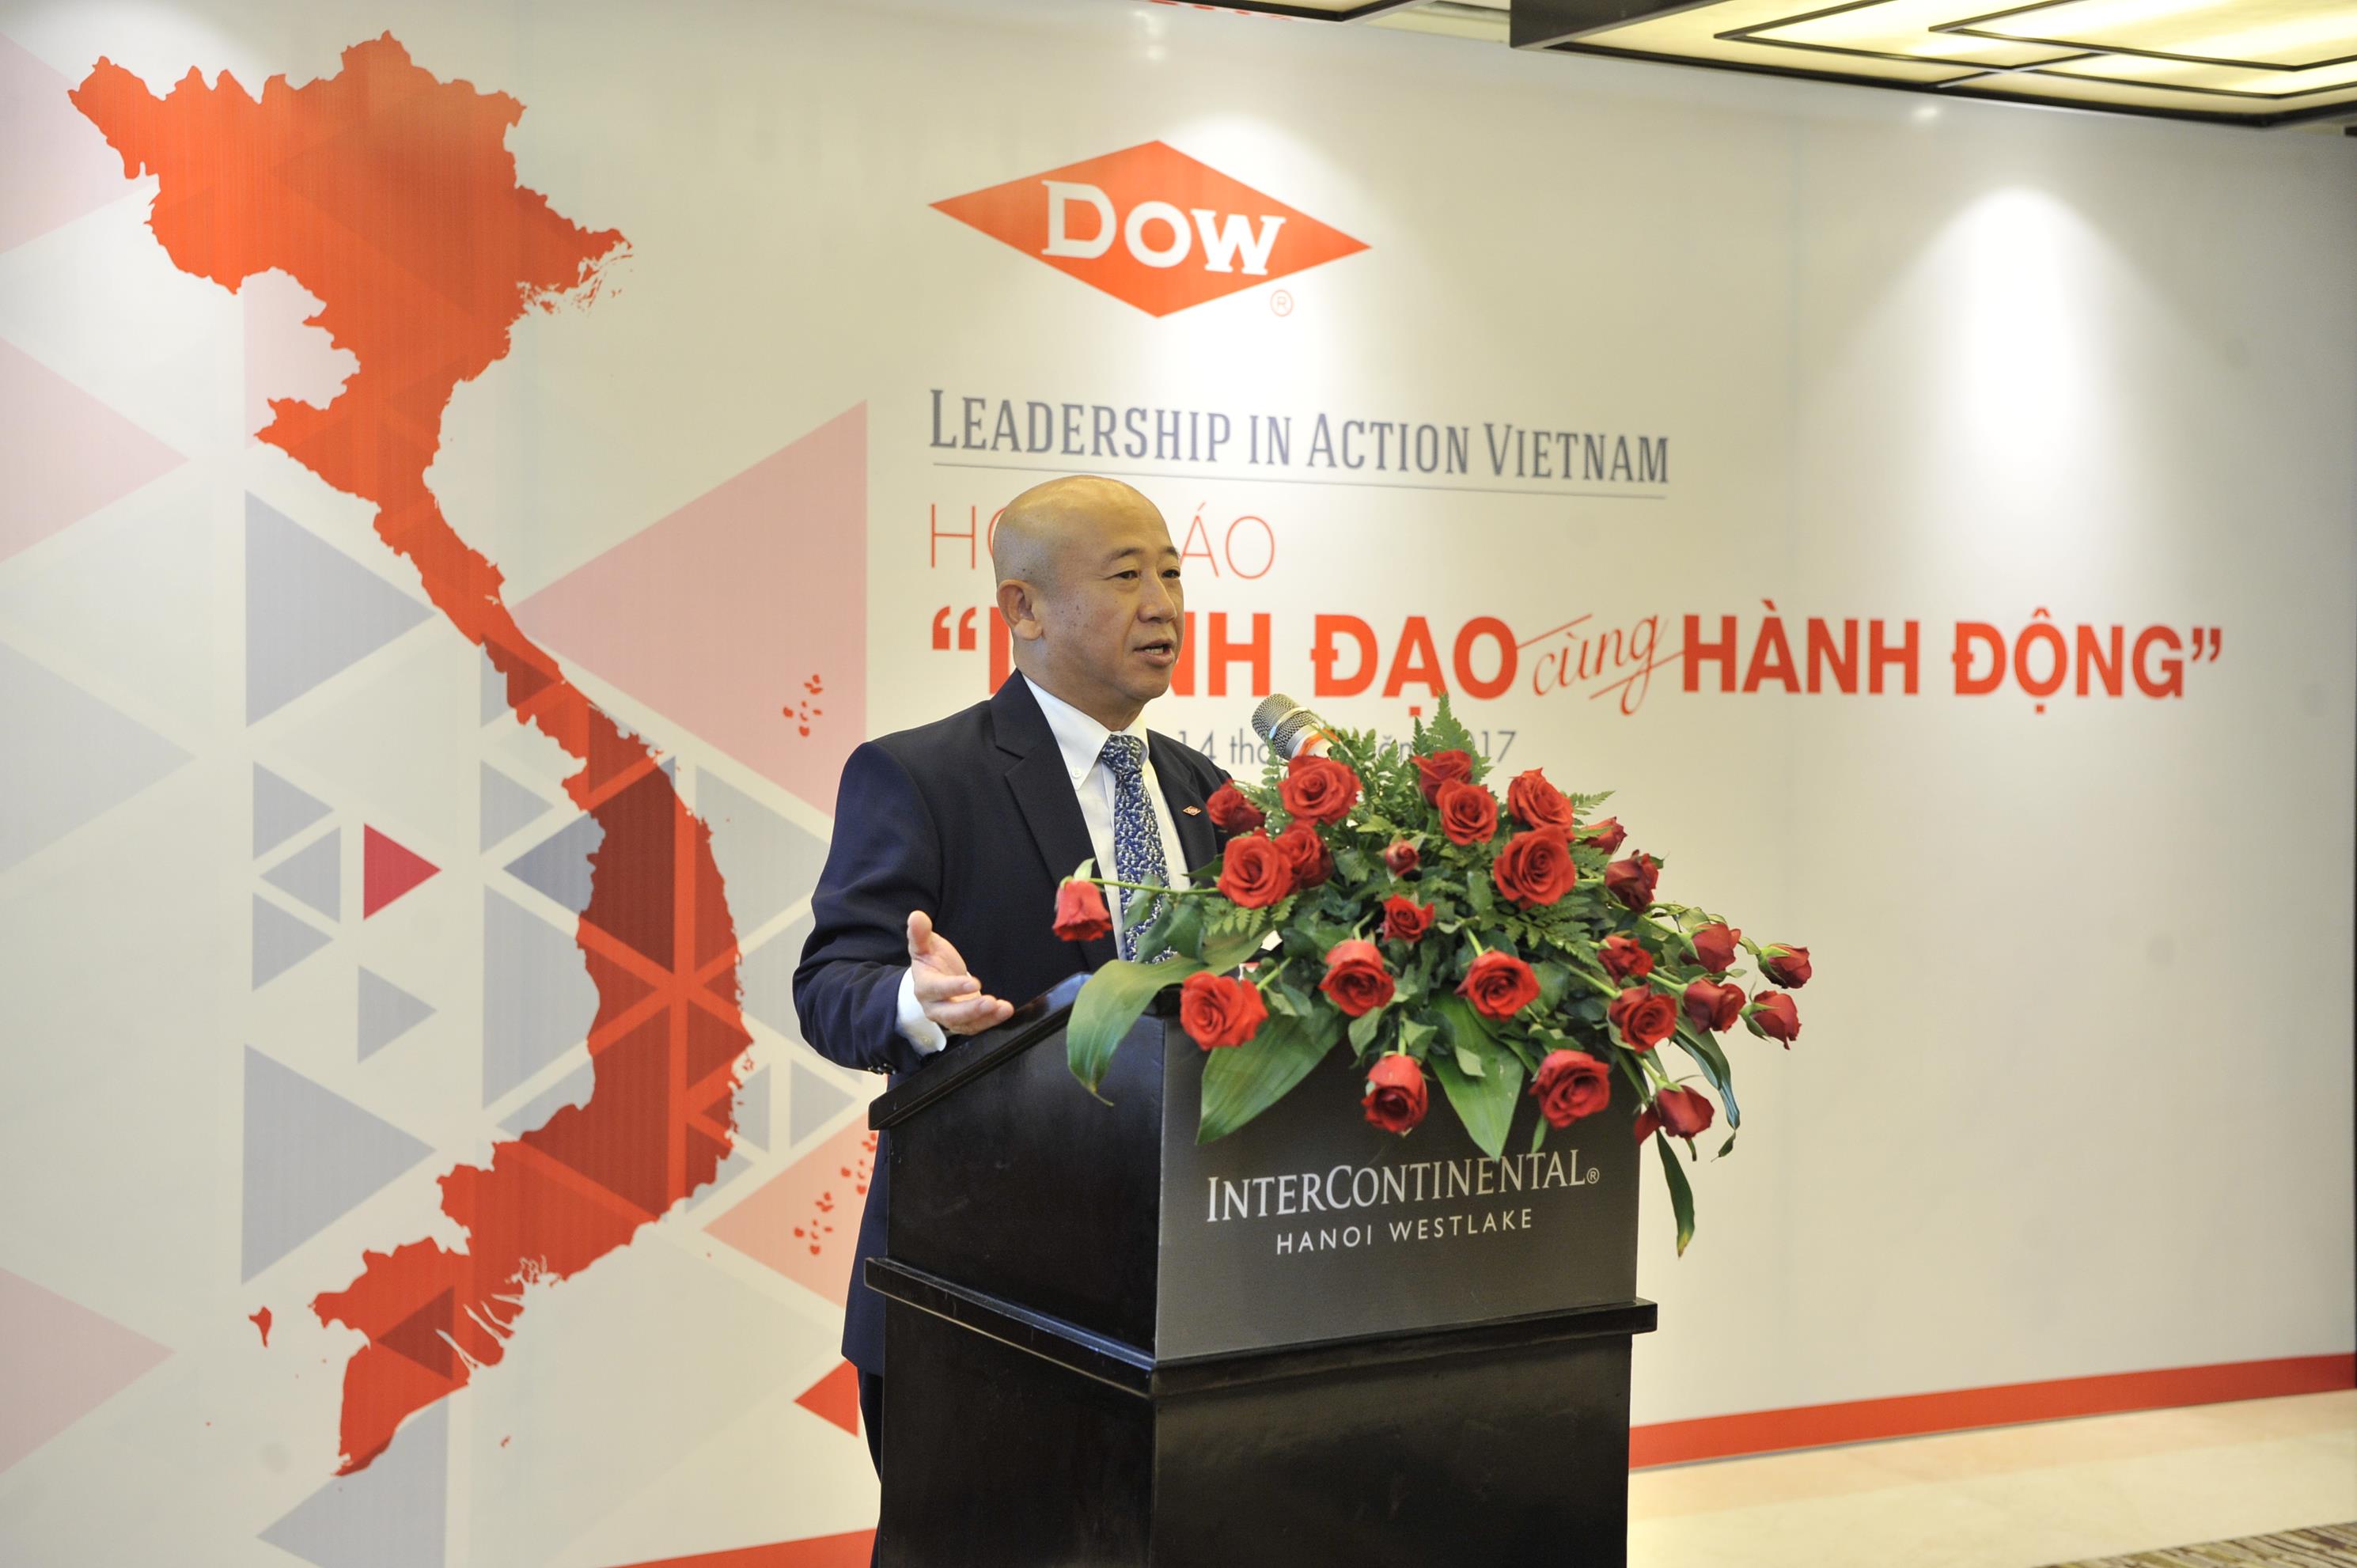 Dow develops leaders while addressing world challenges 